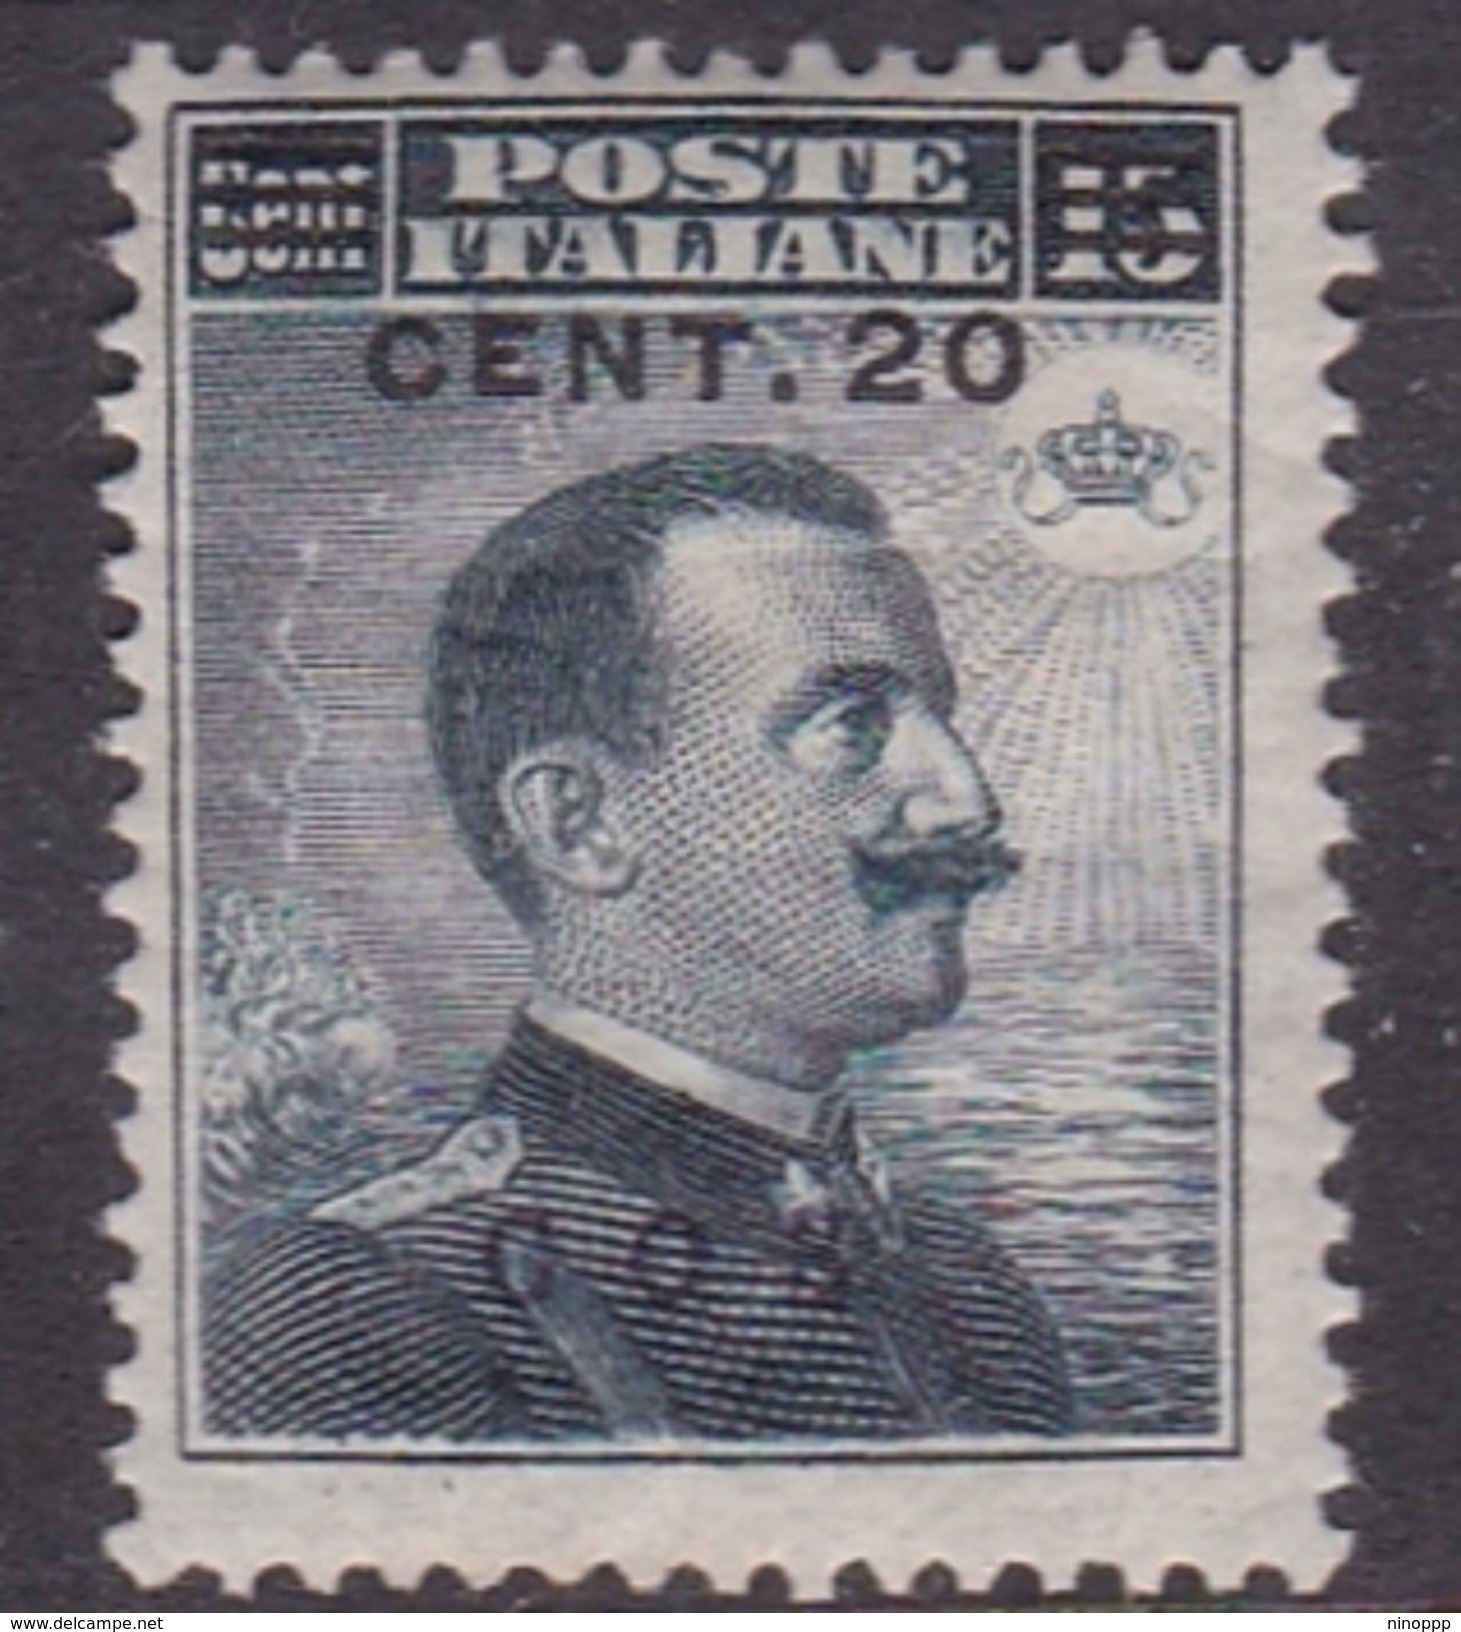 Italy-Colonies And Territories-Aegean-Coo S 8  1916 20c On 15c Slate MH - Aegean (Coo)